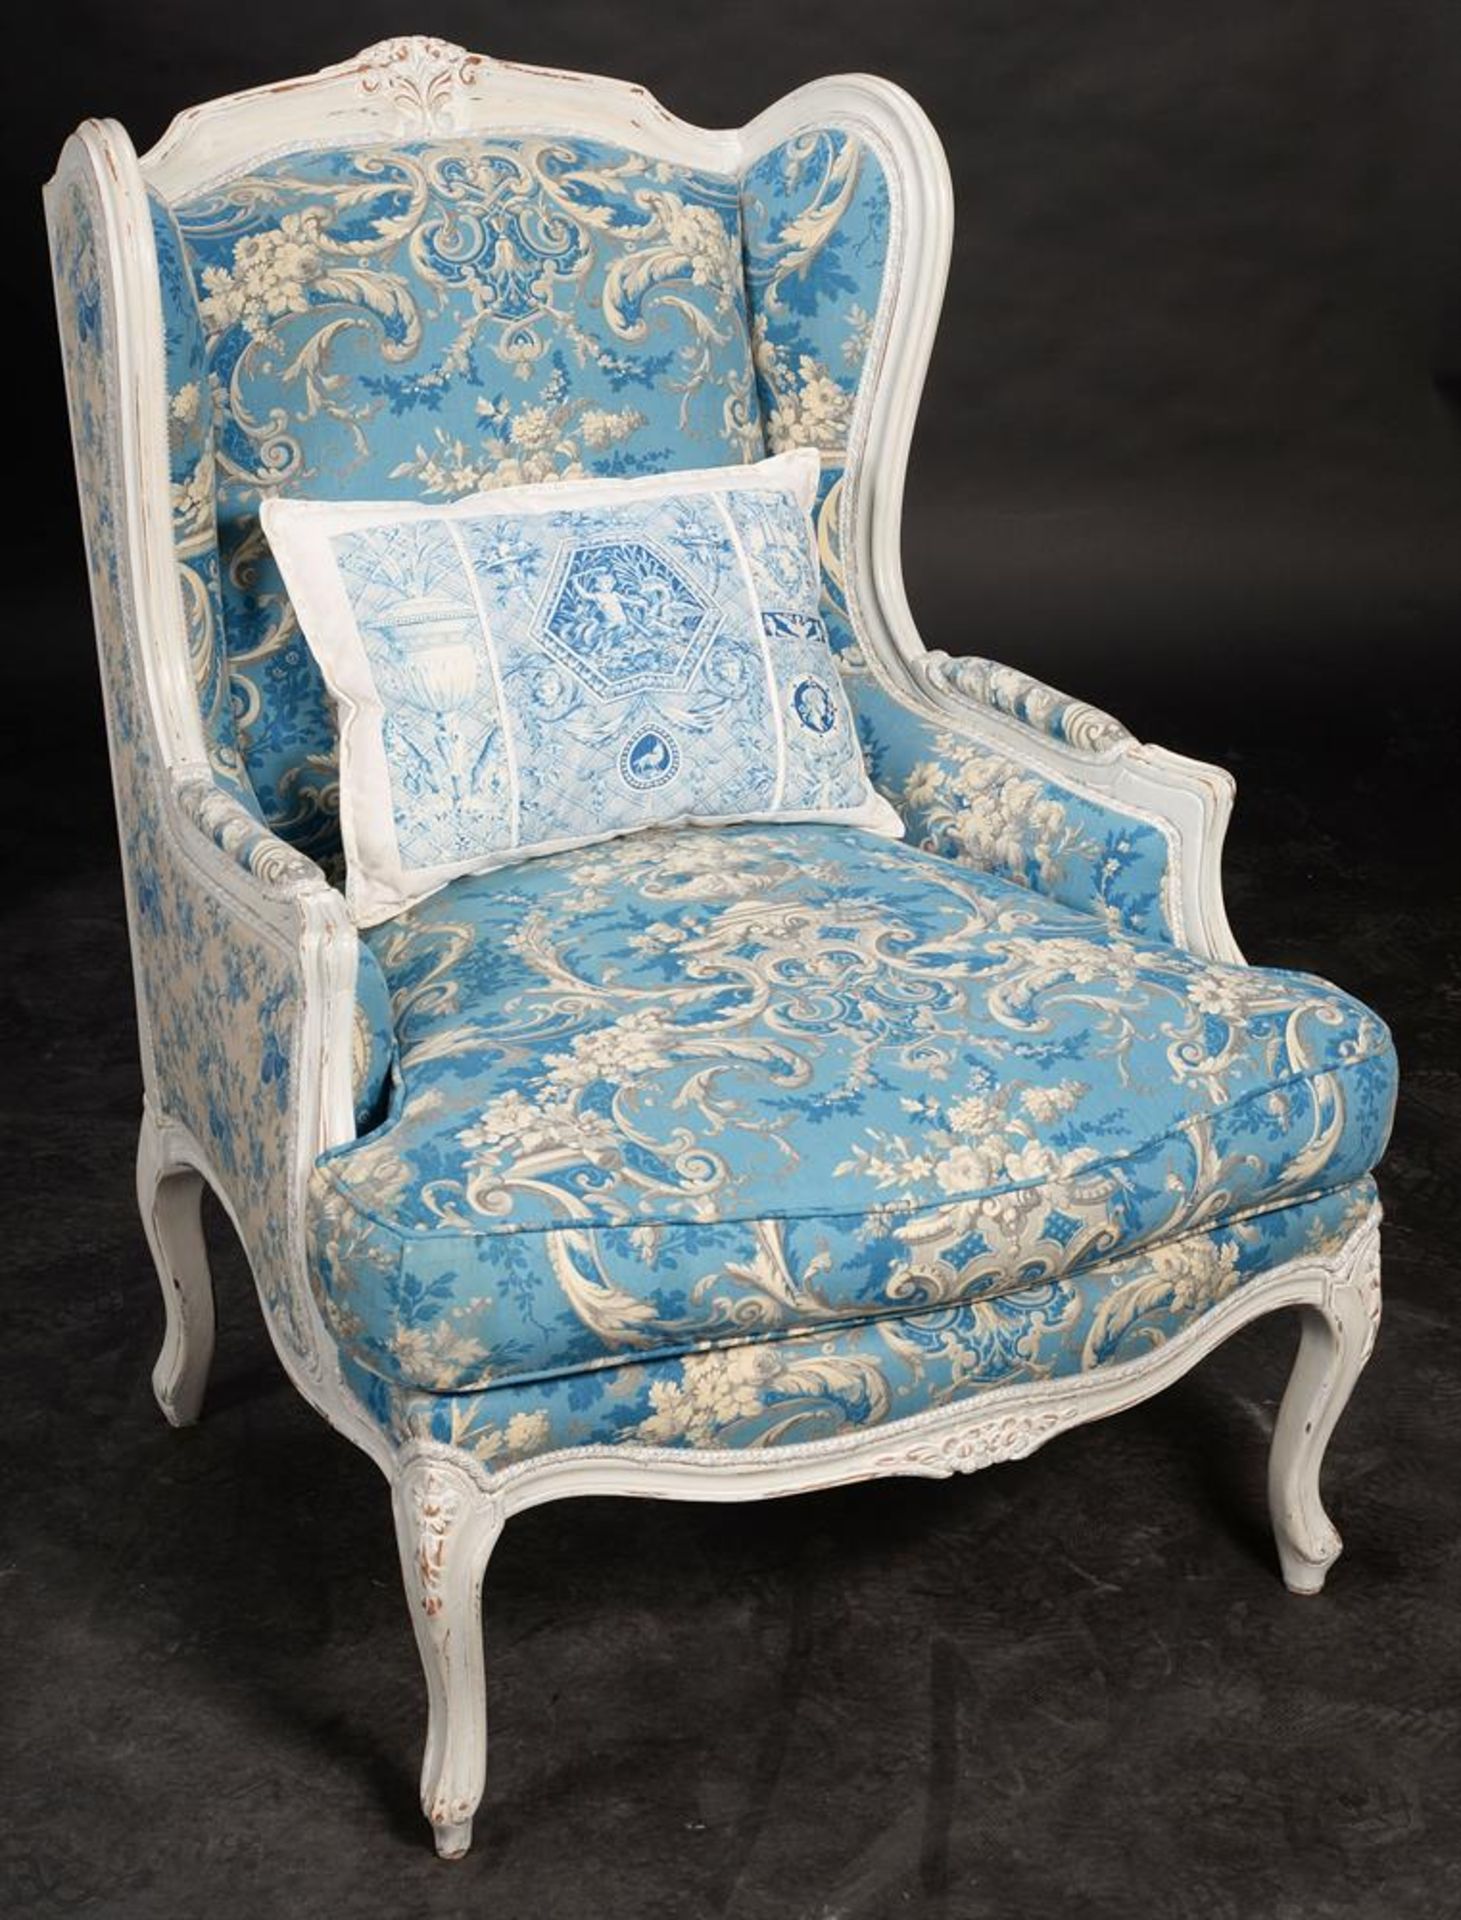 A PAIR OF FRENCH PAINTED WOOD AND UPHOLSTERED ARMCHAIRS IN LOUIS XVI STYLE - Image 2 of 3